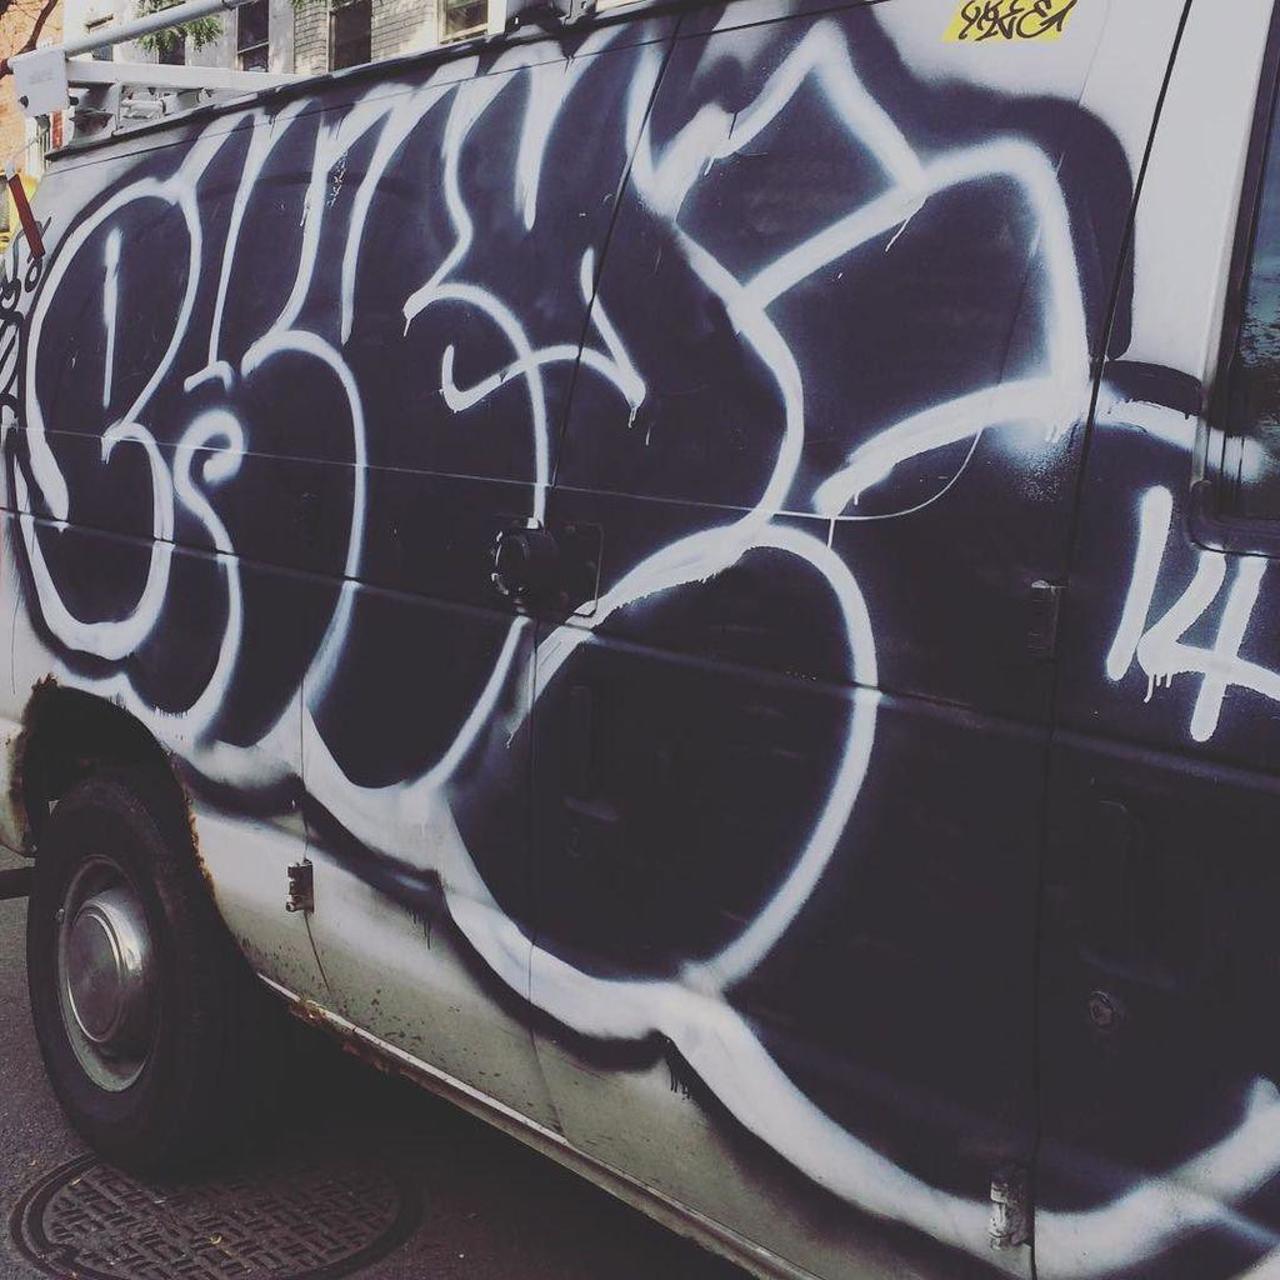 #nycgraffititruck #nyctags #nycgraffiti #nycstreetart #nycgraffart #graffiti #graffitiwalls #tags #streetart #stree… http://t.co/1n2PoSuMj2